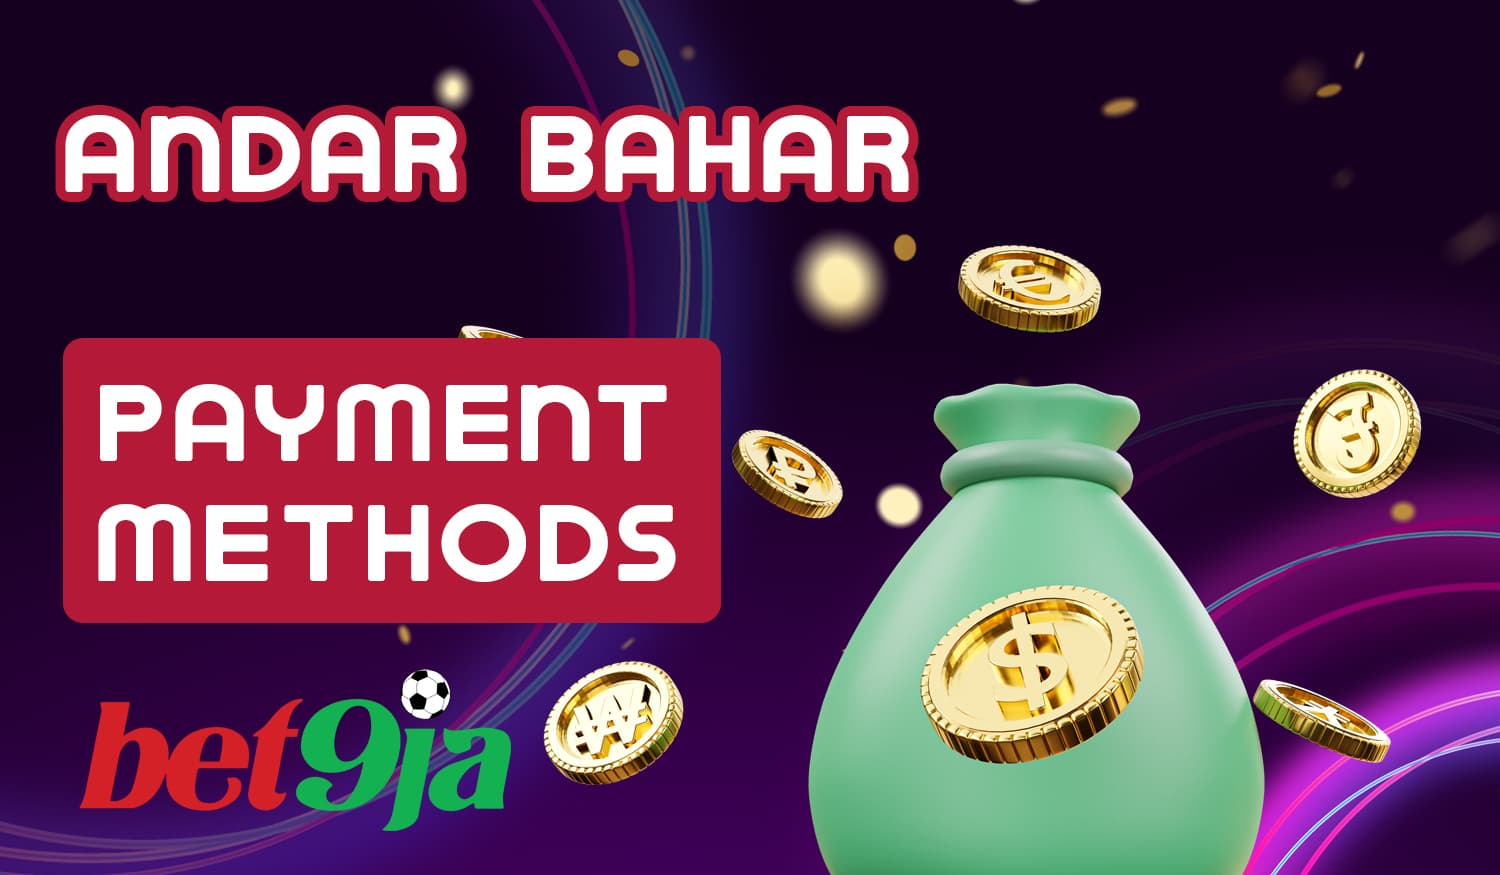 How to deposit and withdraw funds won at Andar Bahar at Bet9ja casino